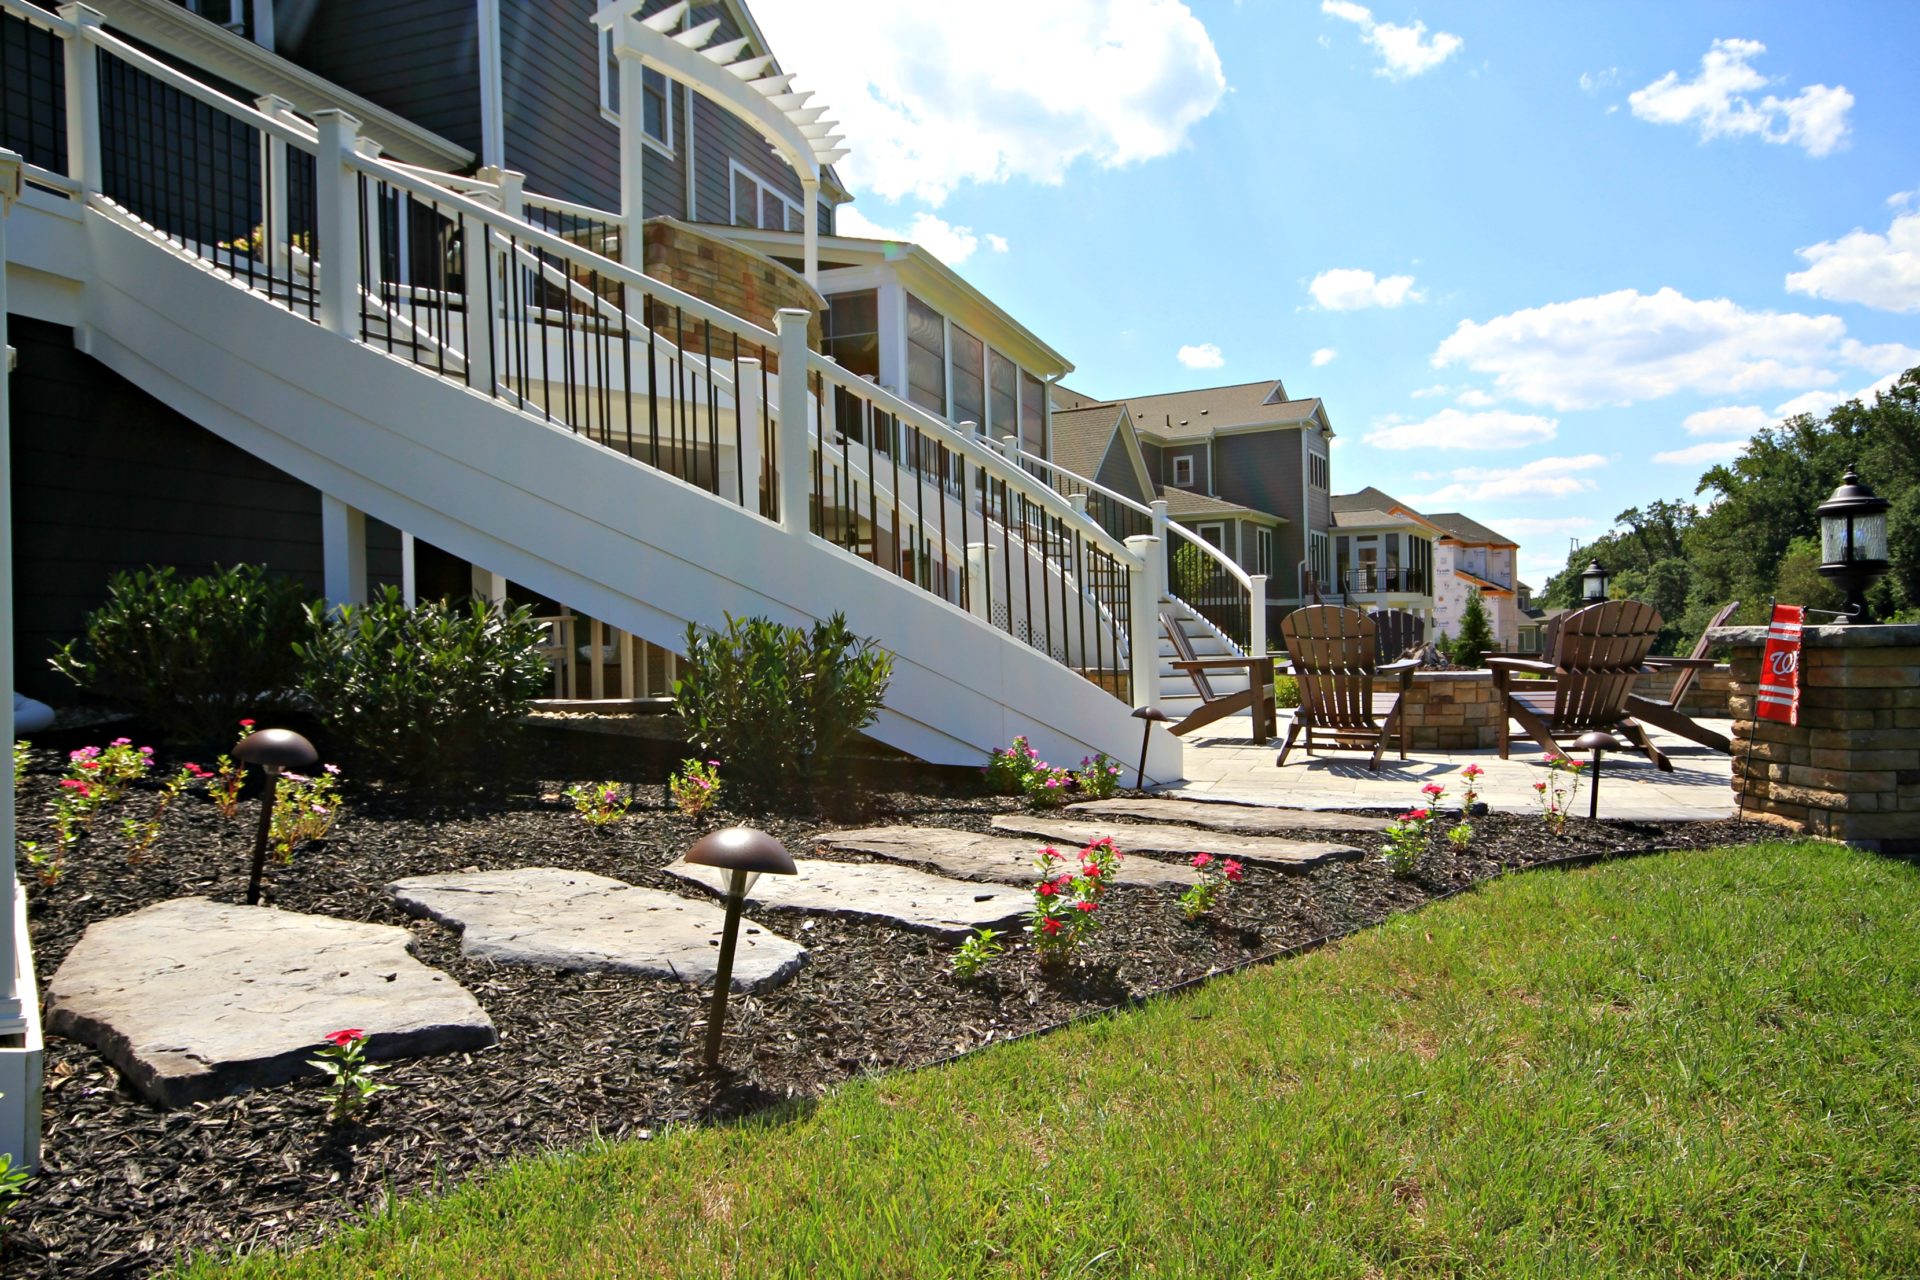 10 Under Deck Landscaping Ideas Trex, Landscaping Around Deck And Patio